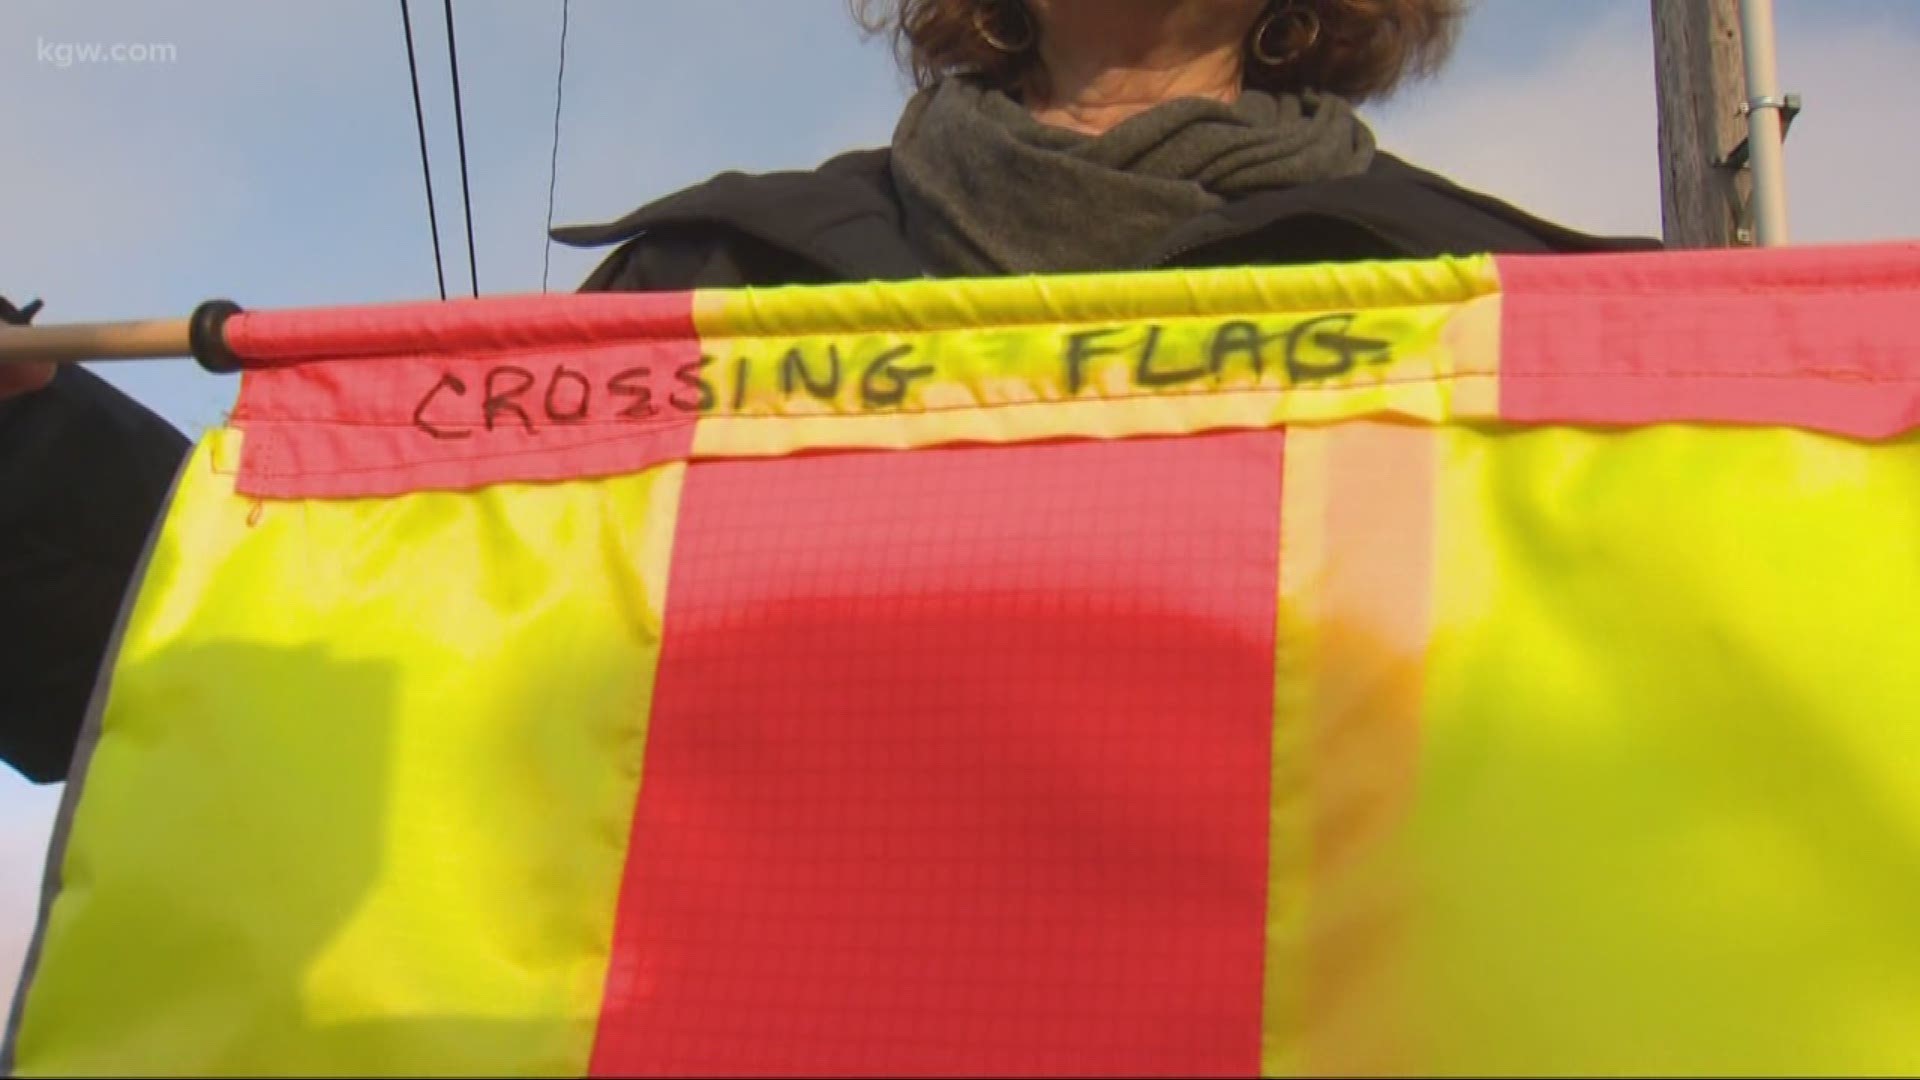 A Portland woman is making crossing flags to leave at the site of a serious crash, hoping it'll make the intersection safer for pedestrians.